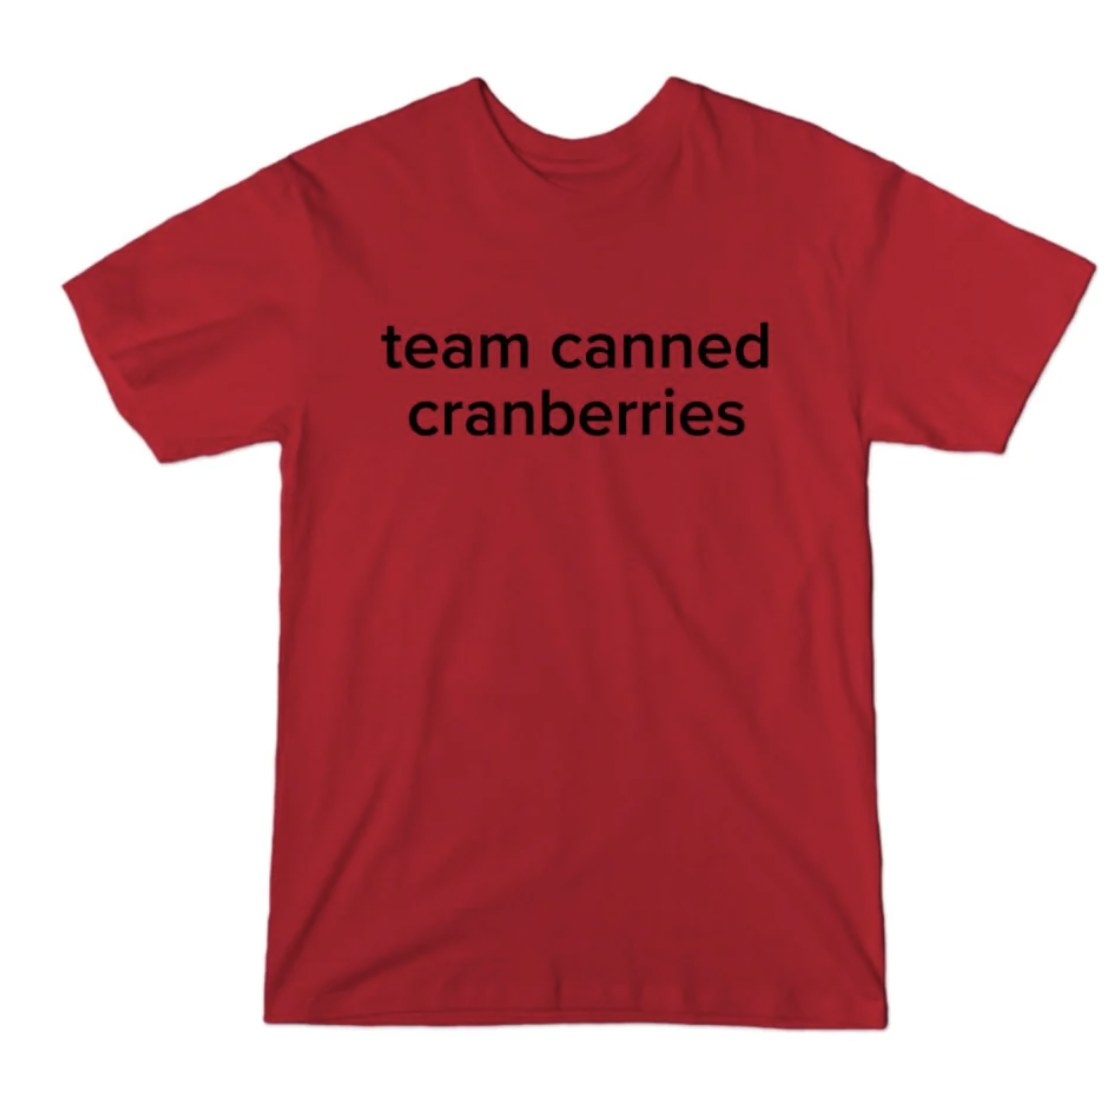 The red t-shirt reading &quot;team canned cranberries&quot;